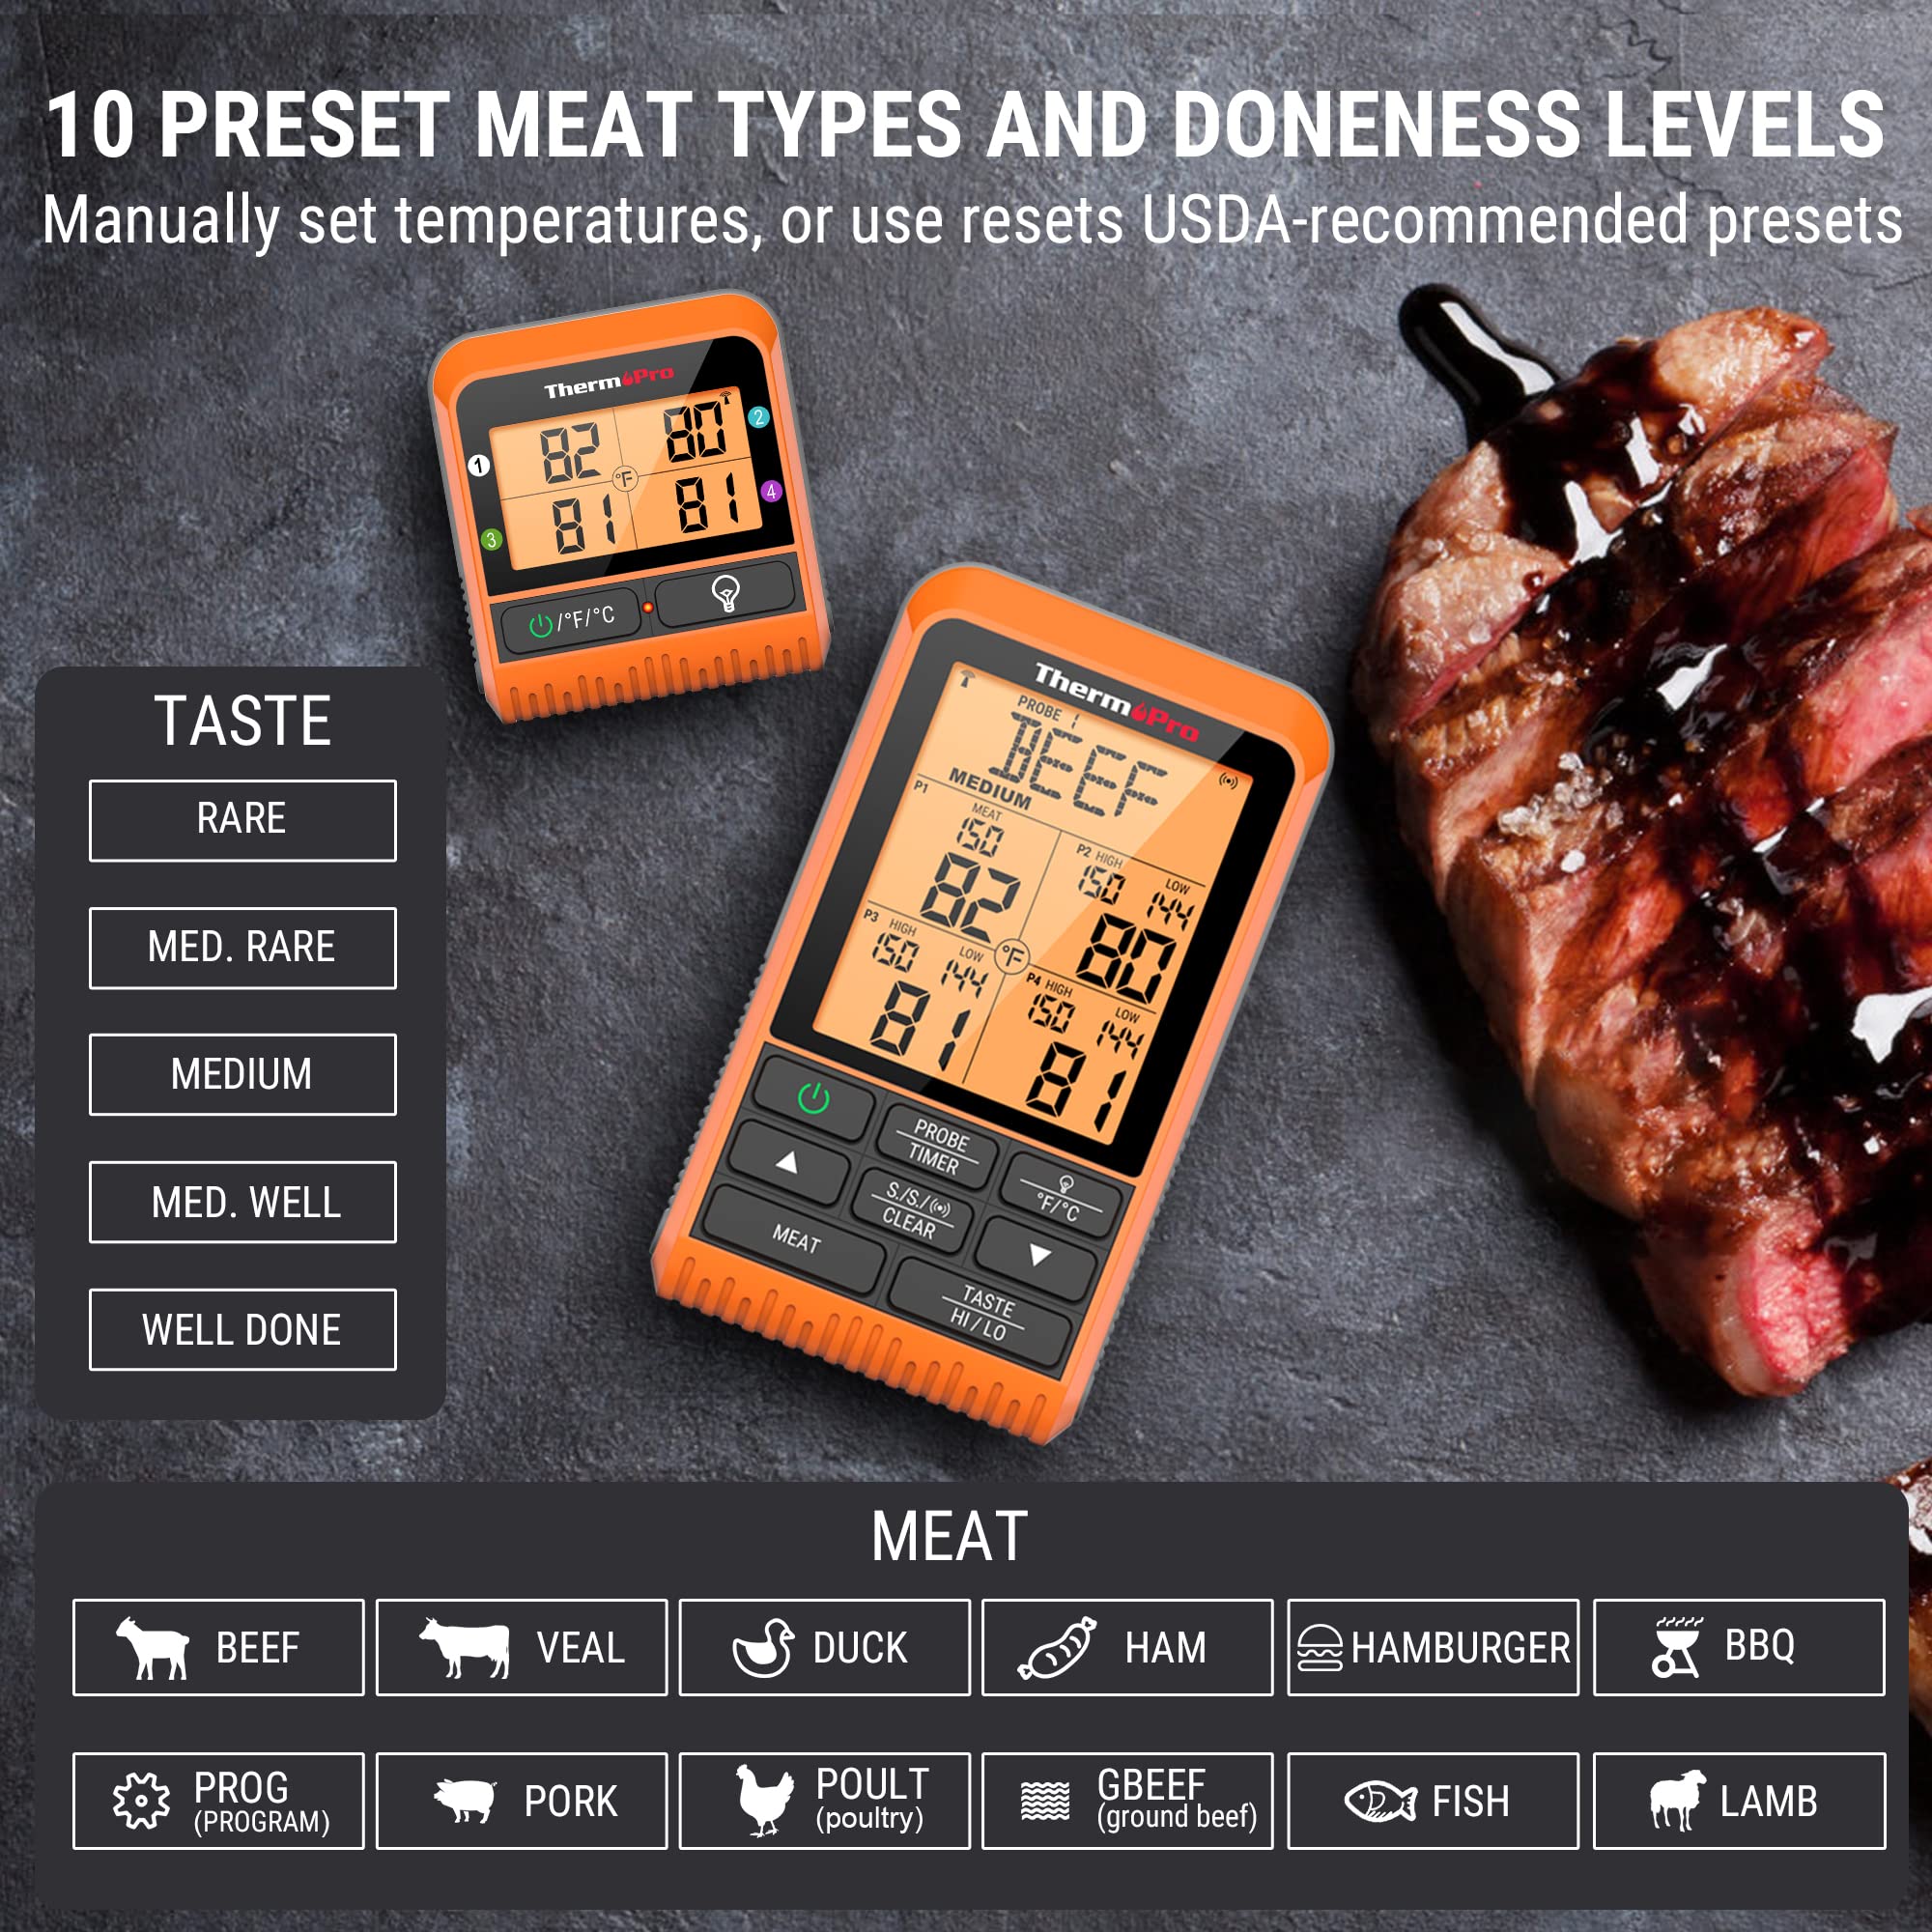 ThermoPro TP829 Wireless Meat Thermometer for Grilling and Smoking with ThermoPro TP610 Programmable Dual Probe Meat Thermometer with Alarm